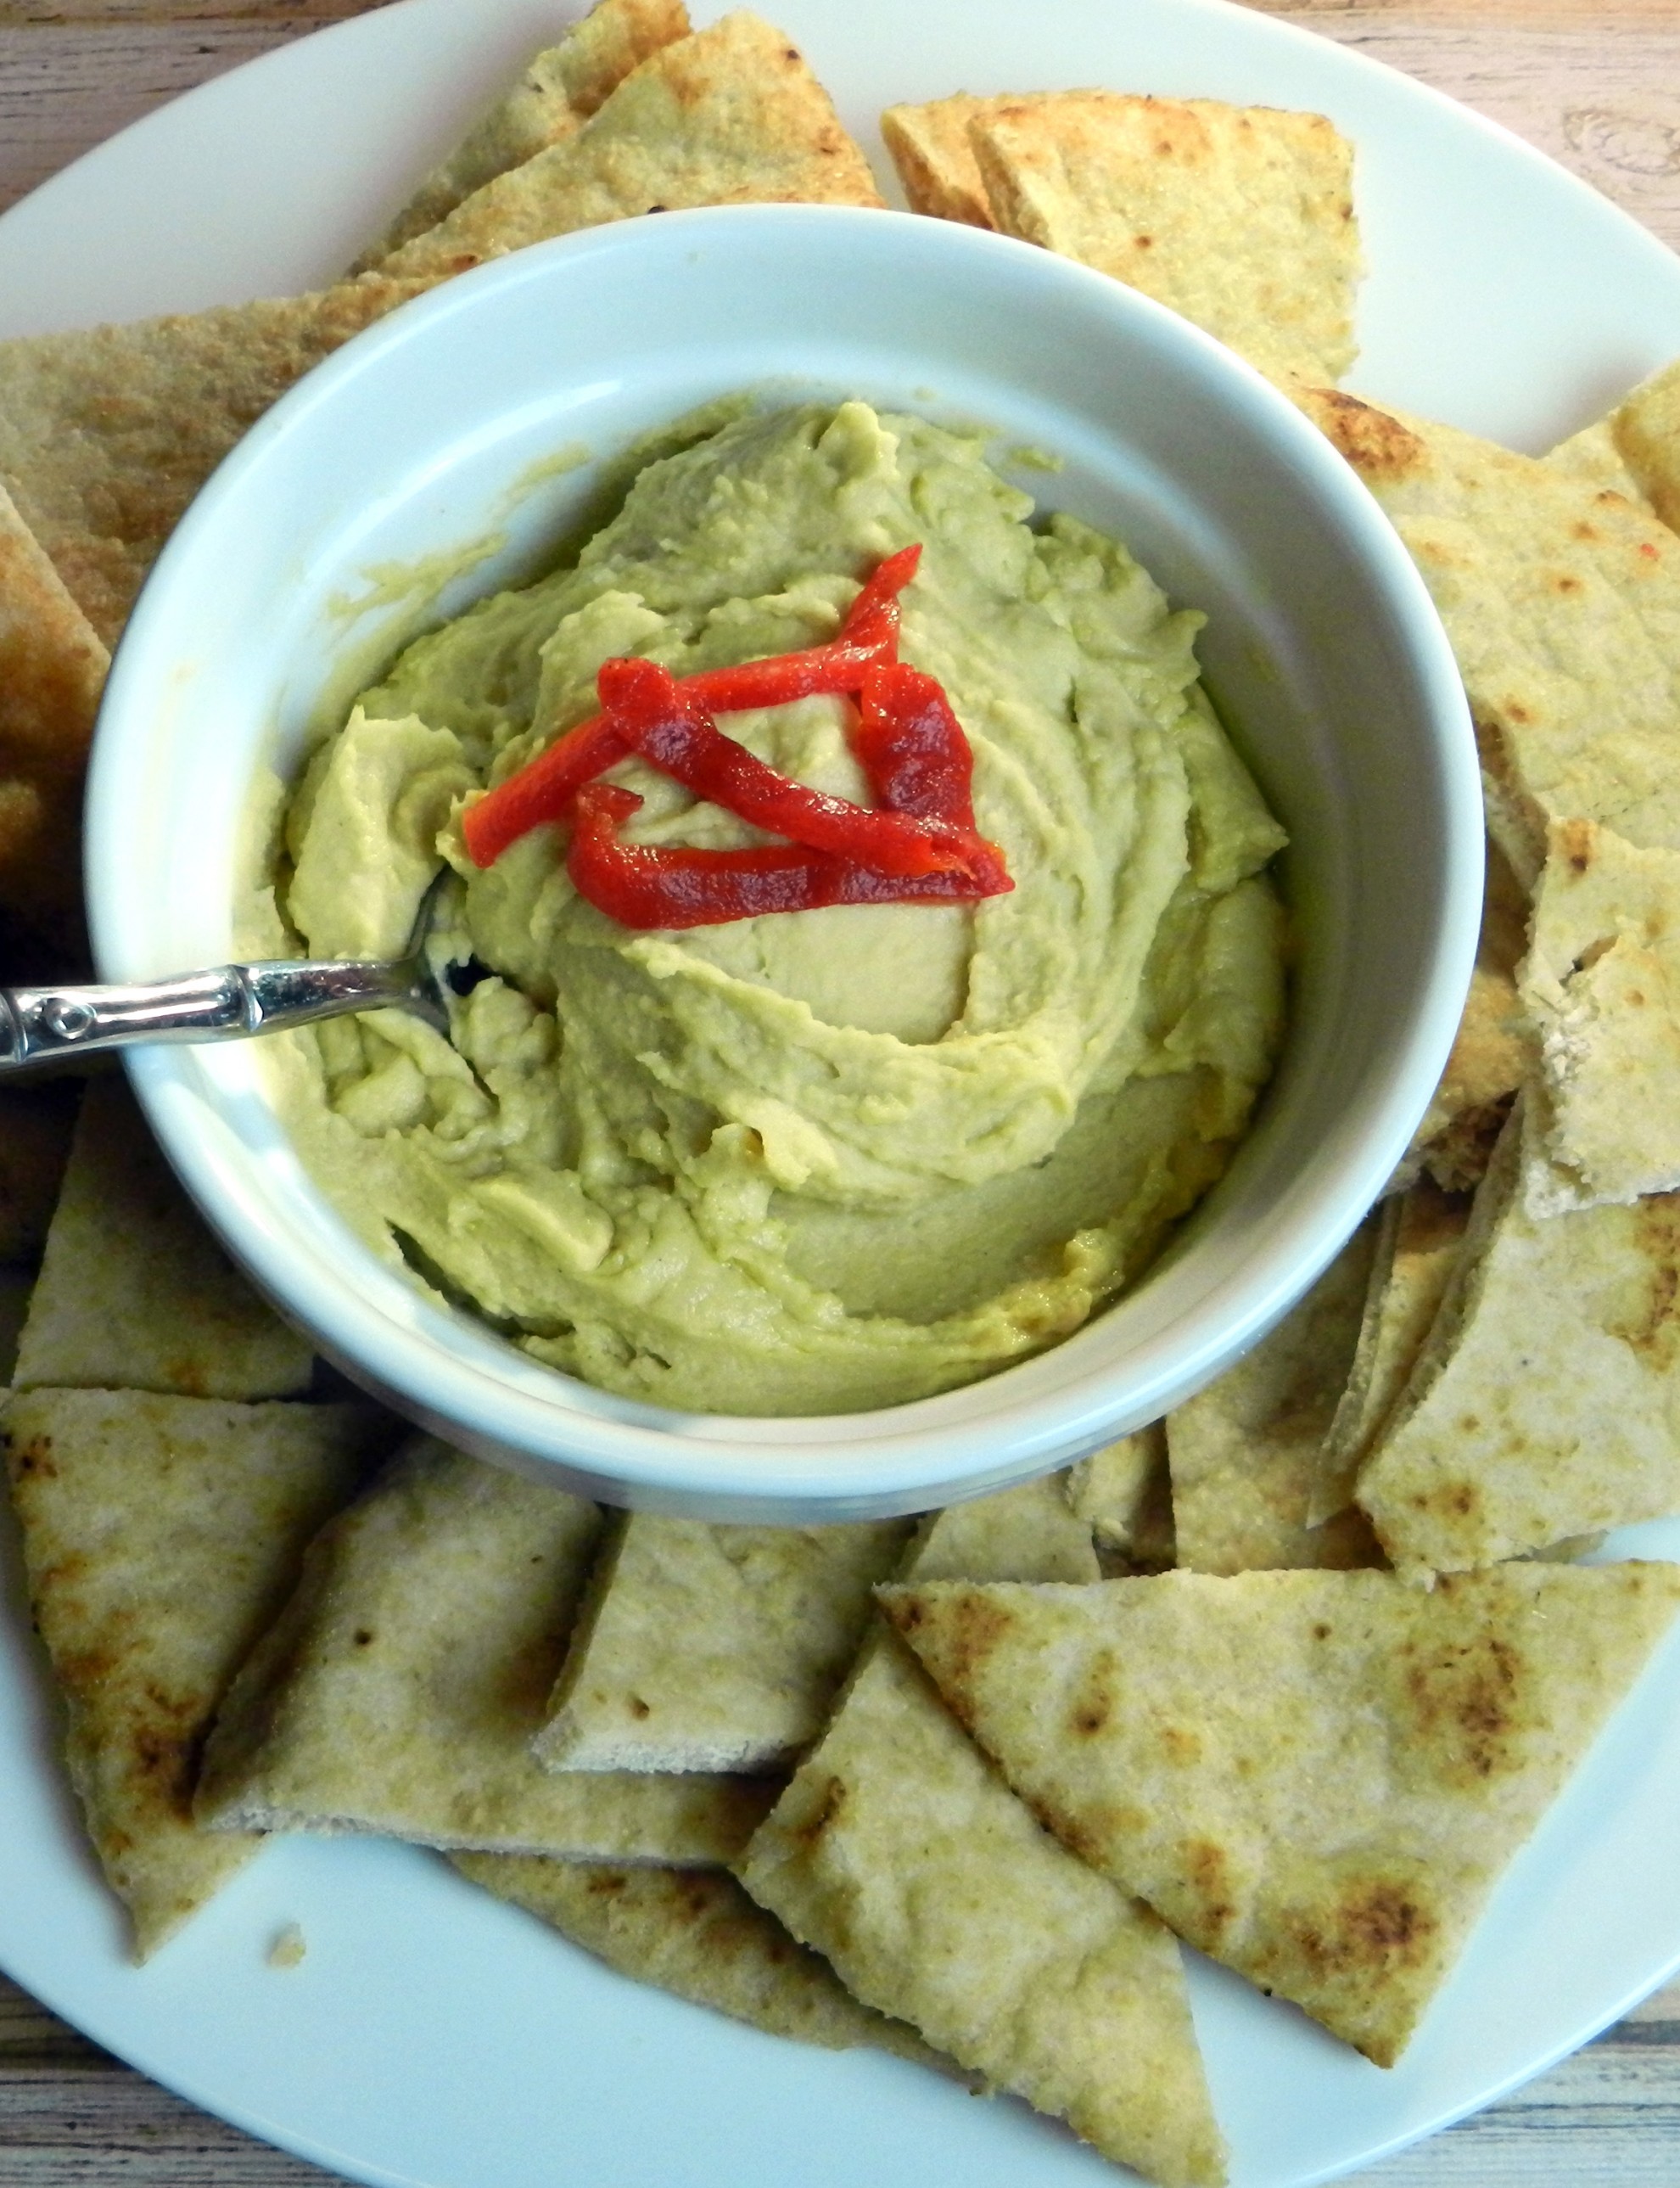 Make Your Own Hummus